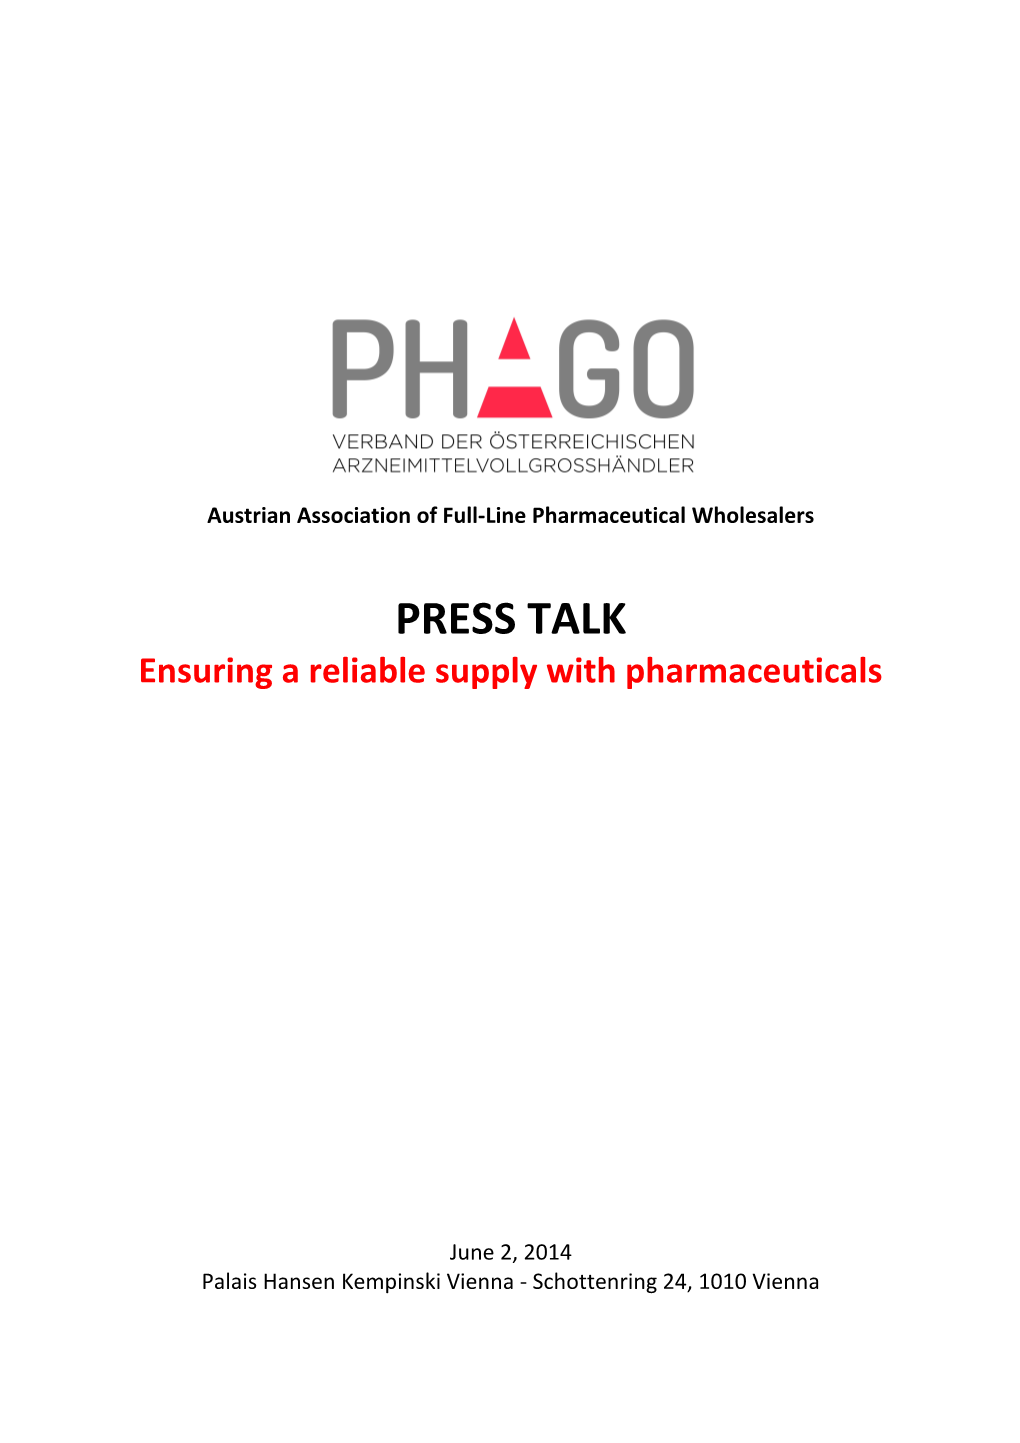 Ensuring a Reliable Supply with Pharmaceuticals